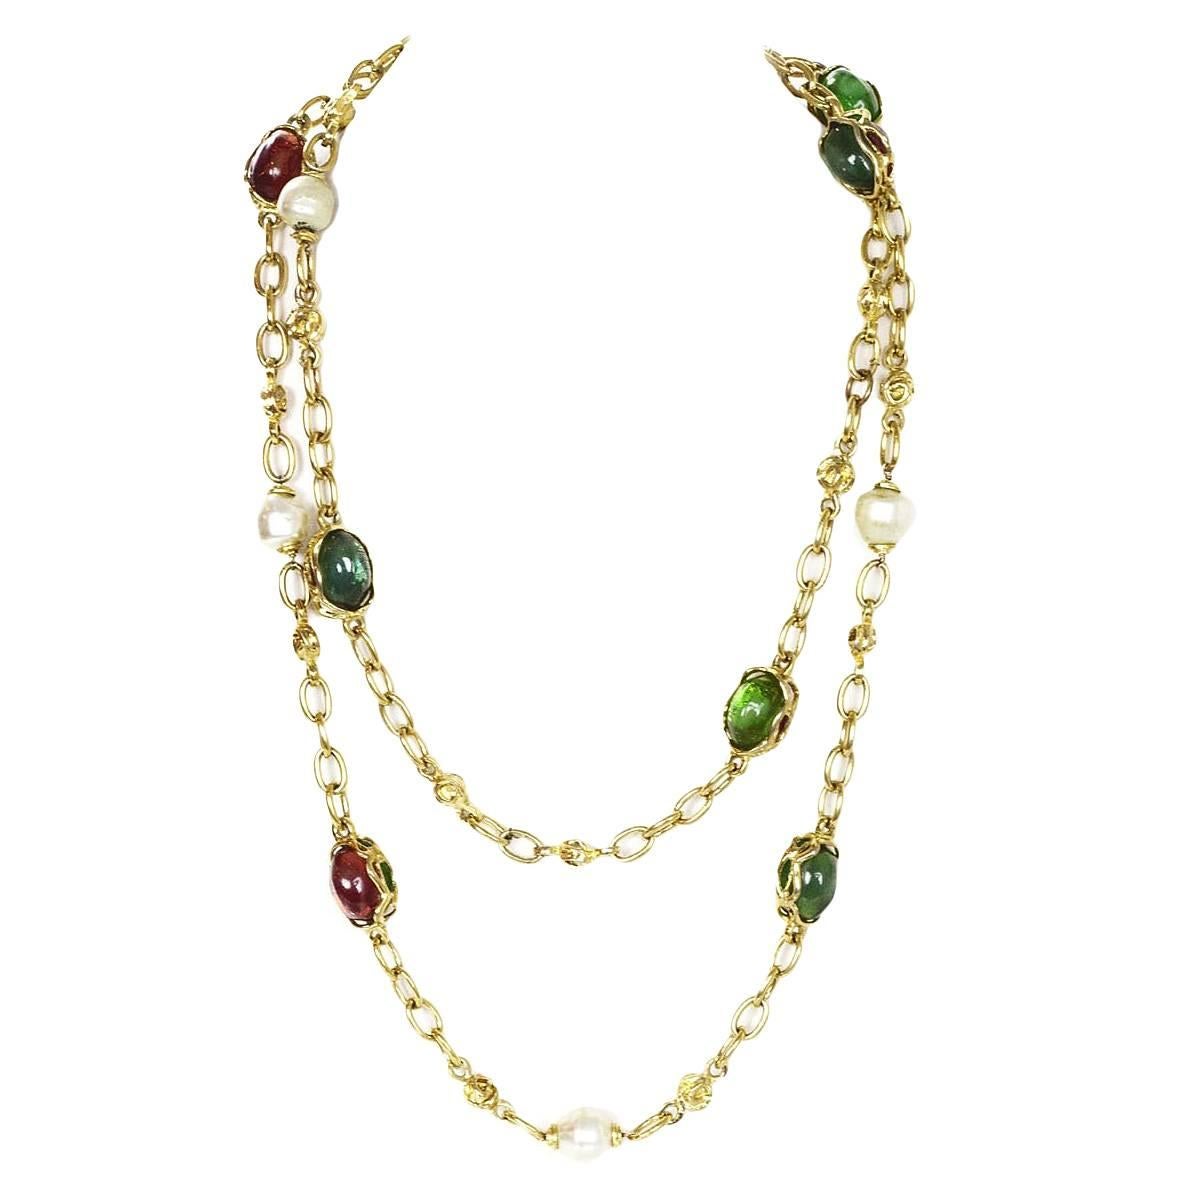 100% Authentic Yves Saint Laurent Faux Pearl And Glass Necklace. Gold chain link necklace features faux pearls, green and amber glass beads. Jump ring clasp with YSL logo. Excellent pre-owned condition with the exception of scuffs and marks on